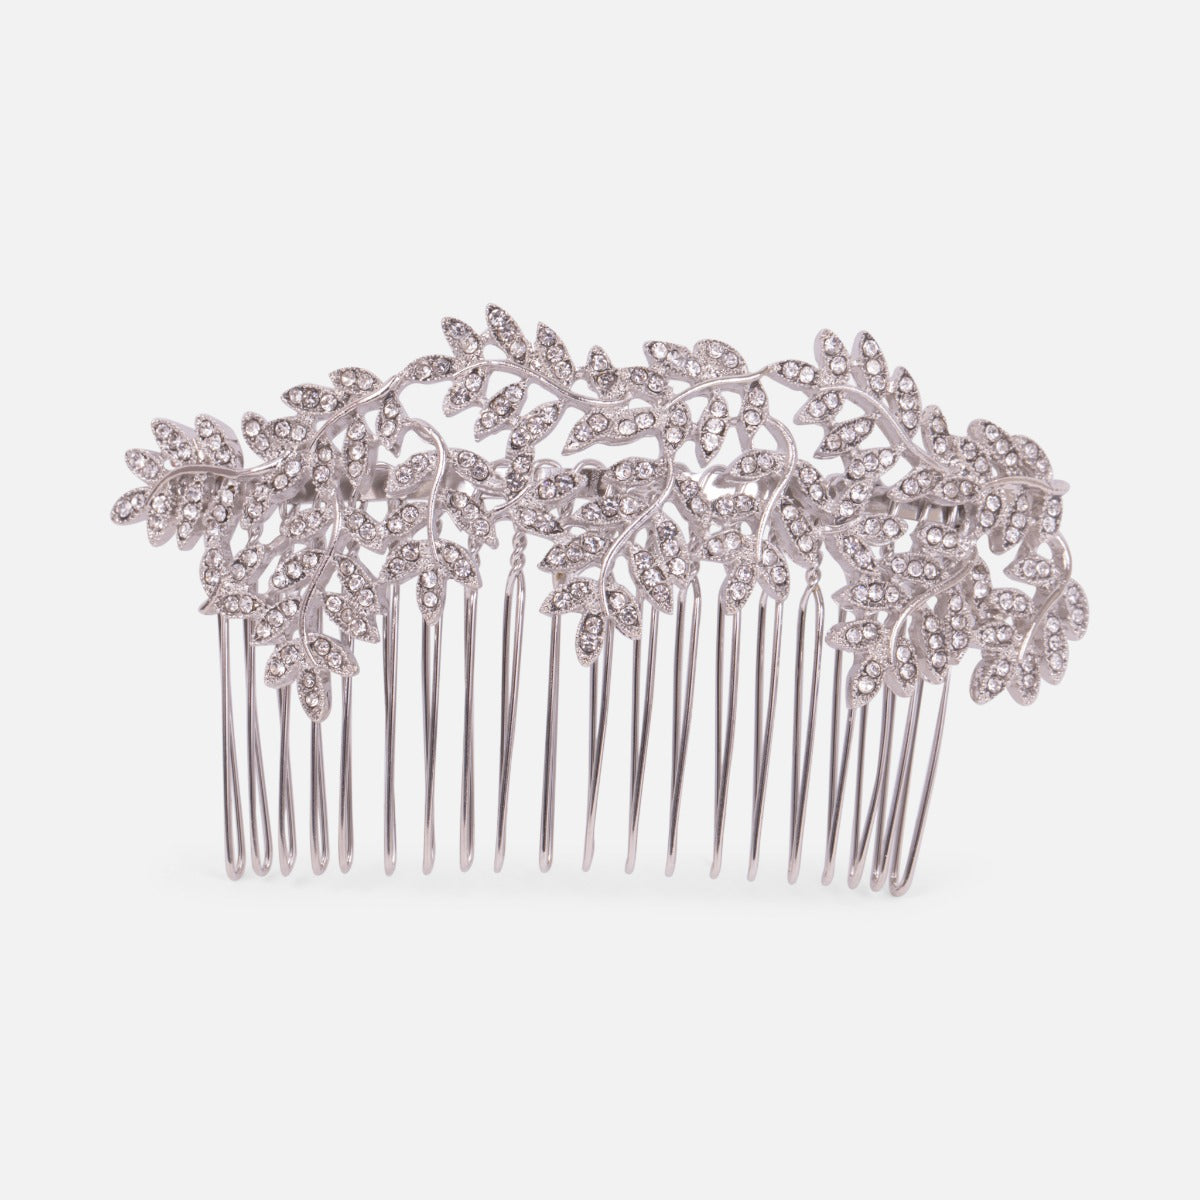 Decorative silvered comb with leaf ornaments